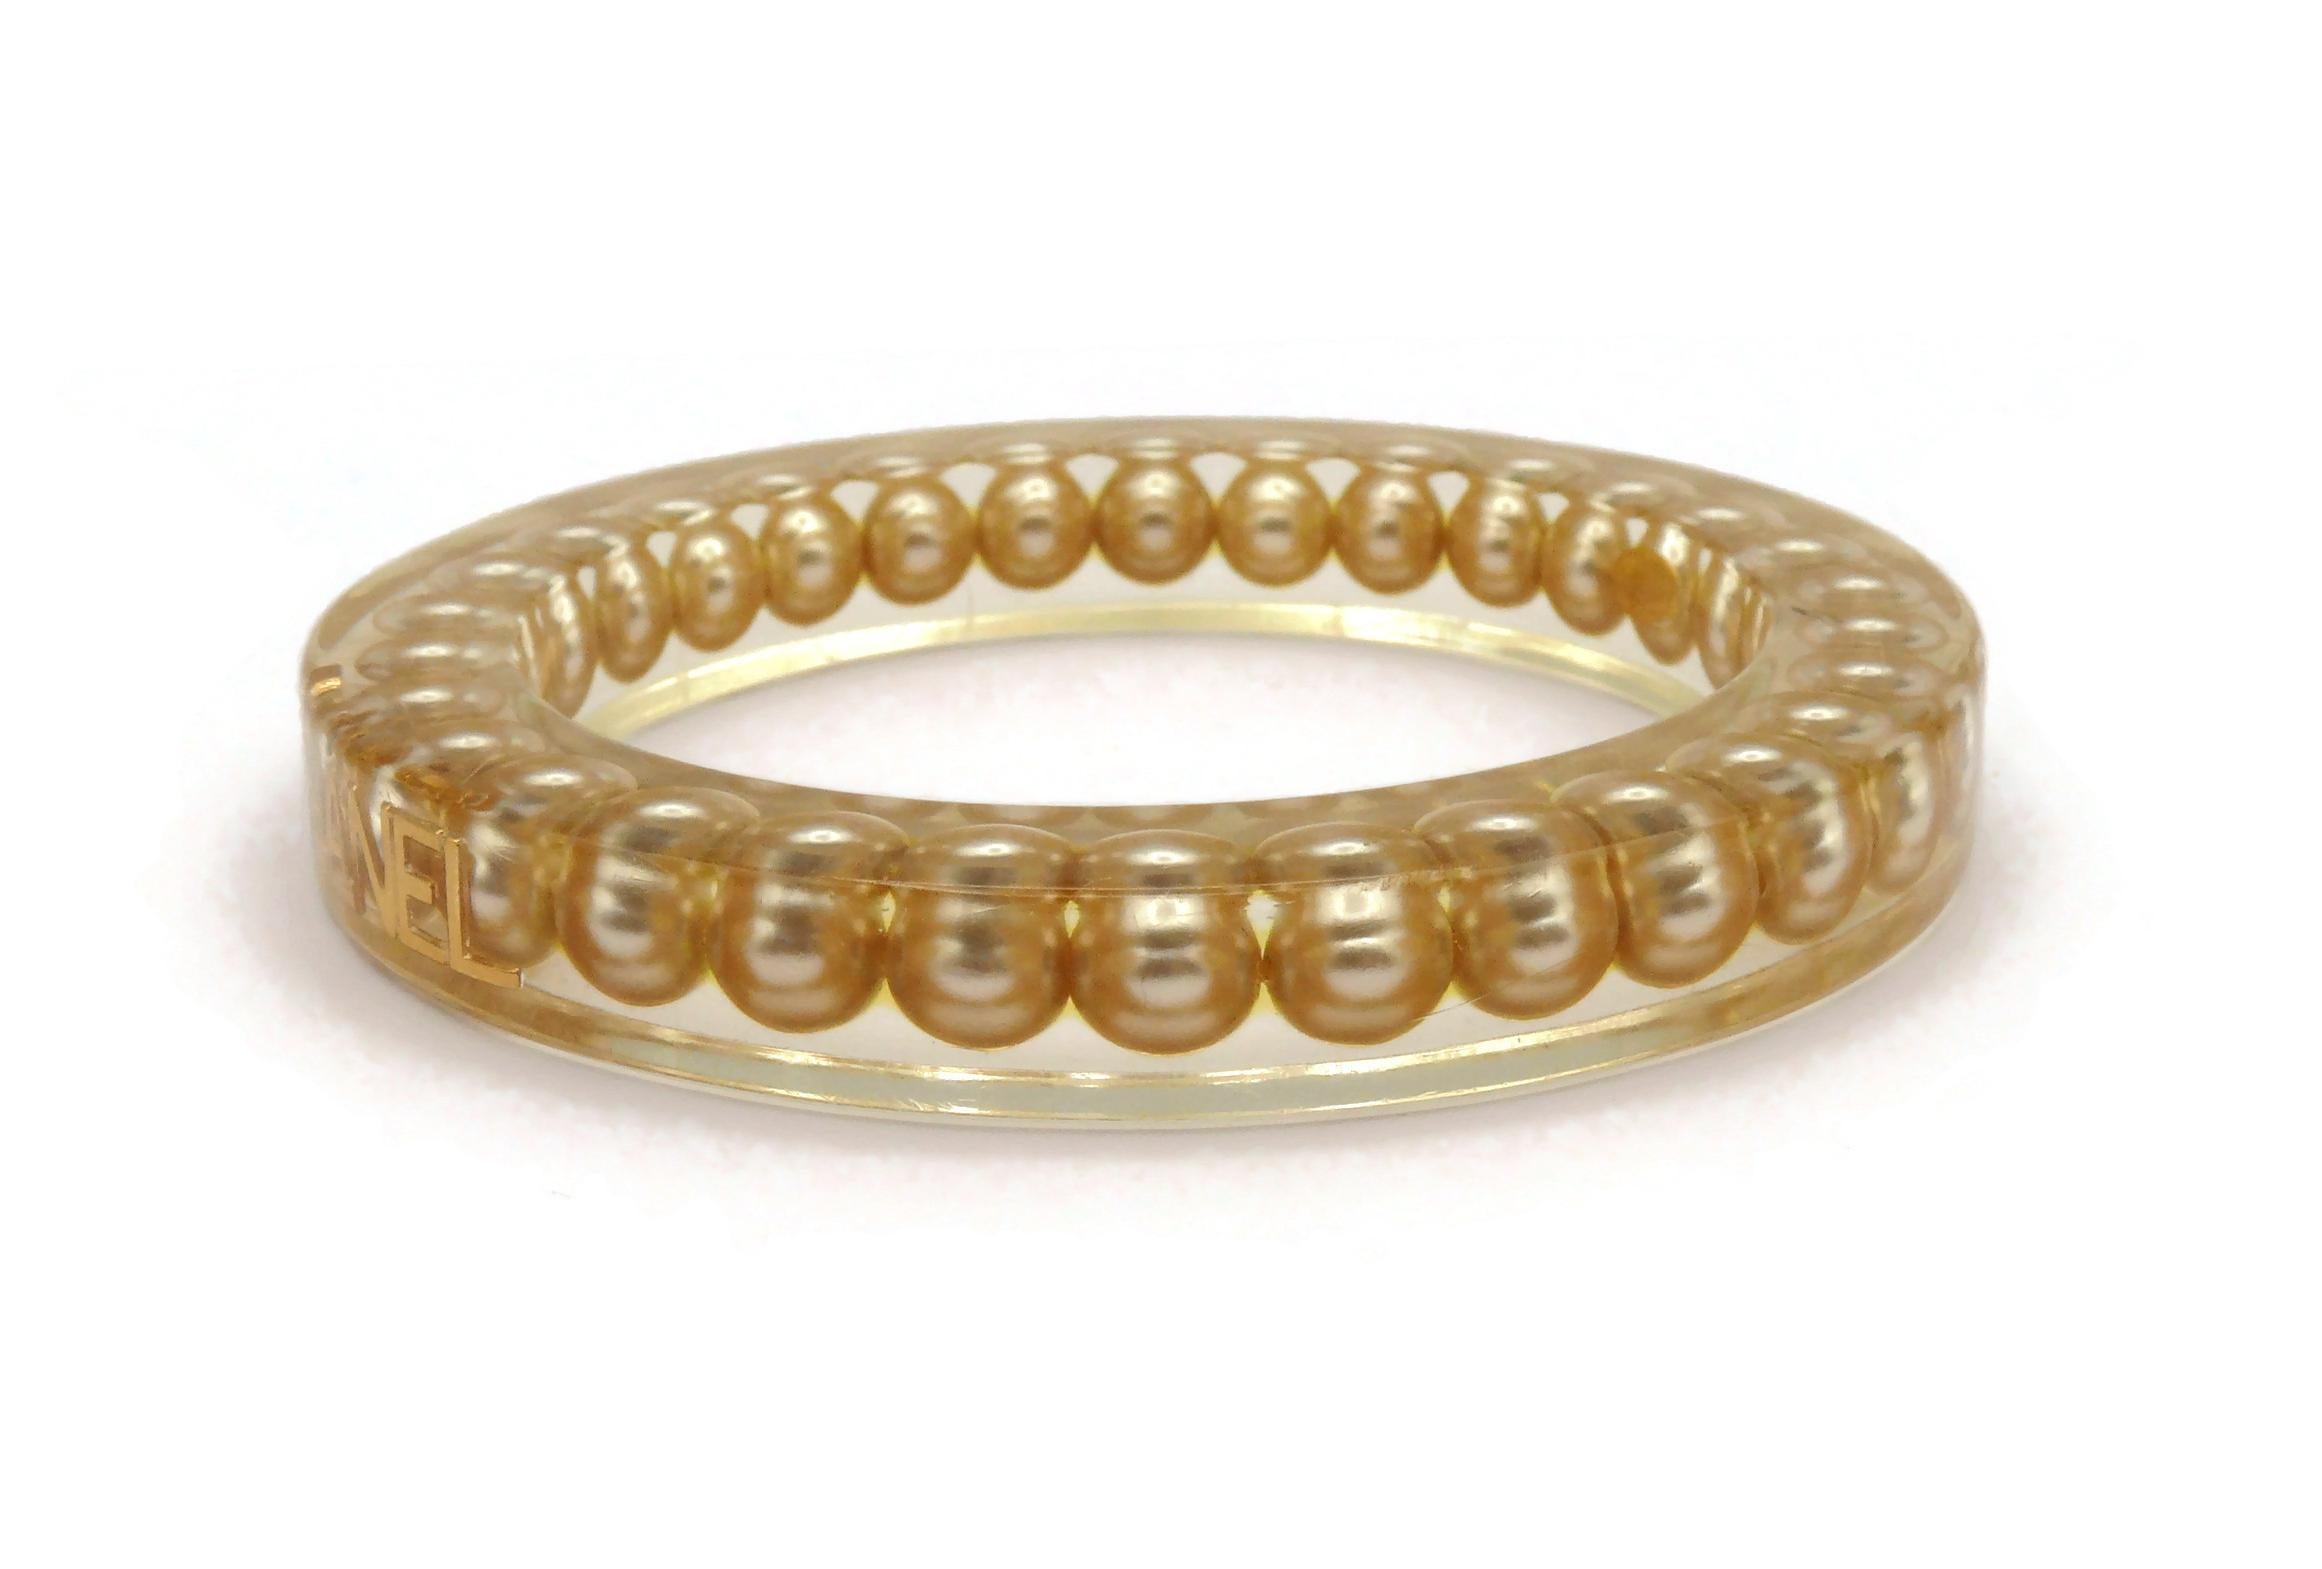 CHANEL by KARL LAGERFELD Vintage Lucite Pearl Inlaid Bangle, Spring 1997 For Sale 1